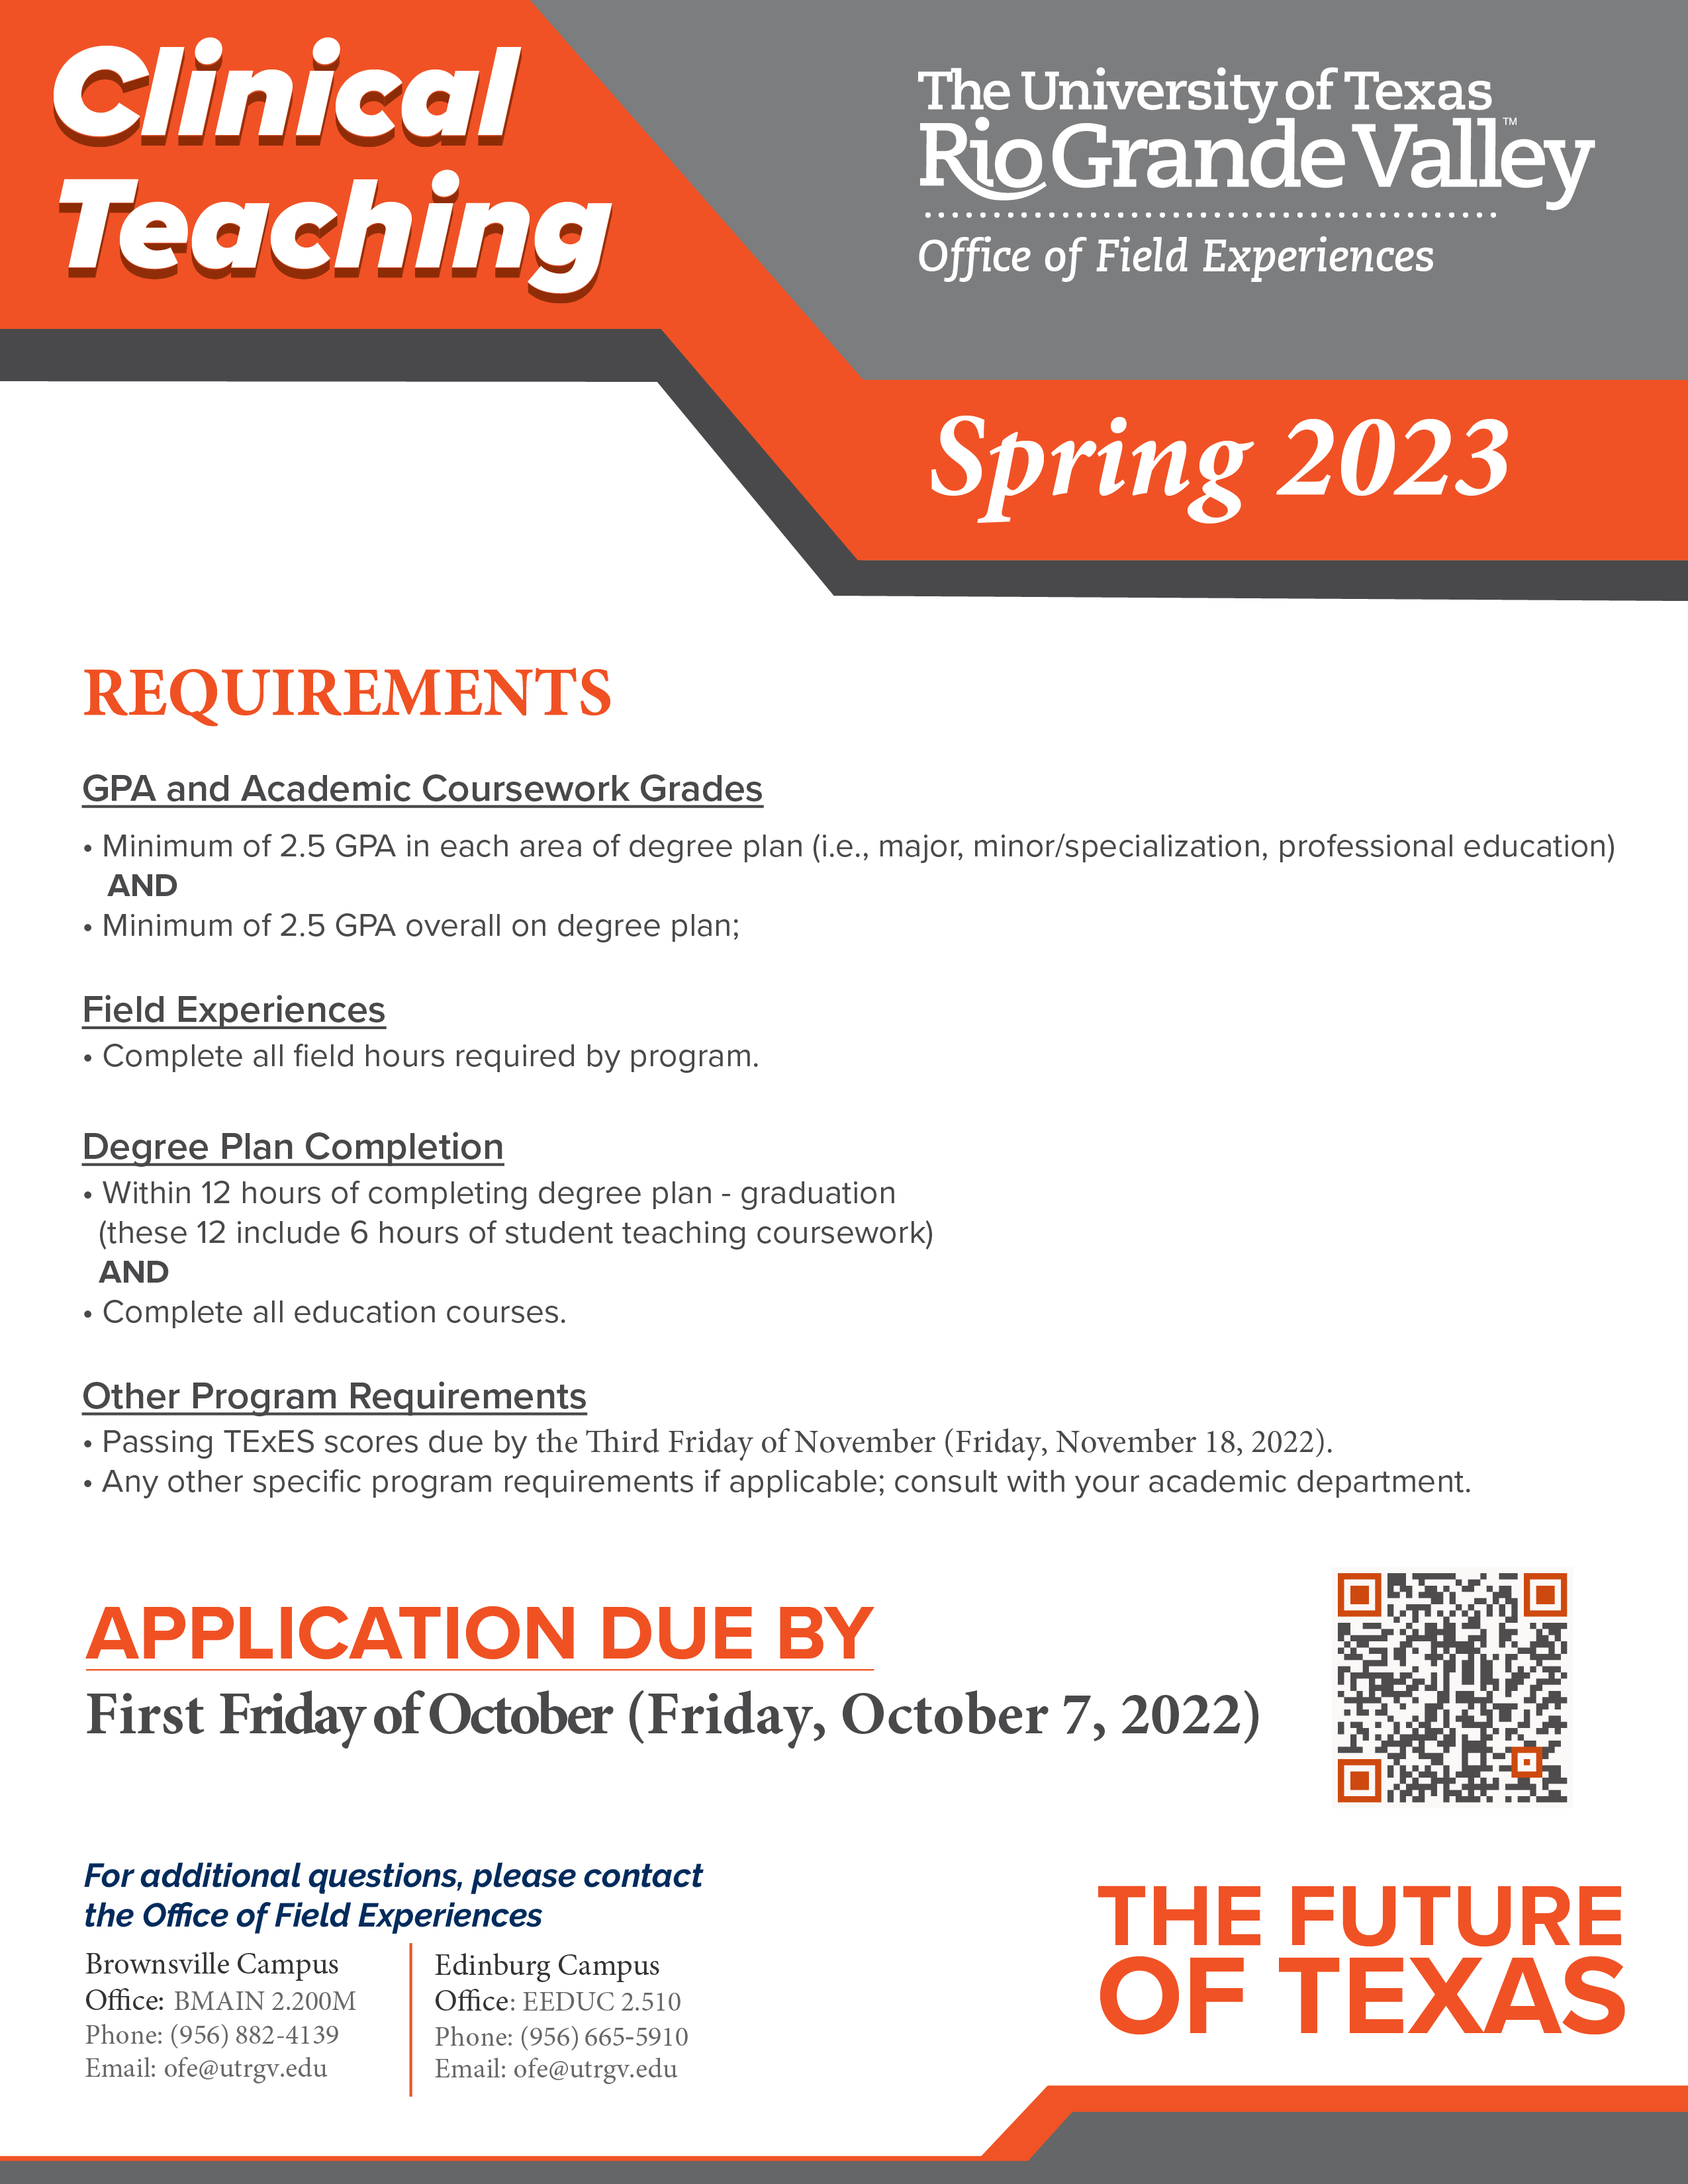 Clinical Teaching Application for Spring 2023